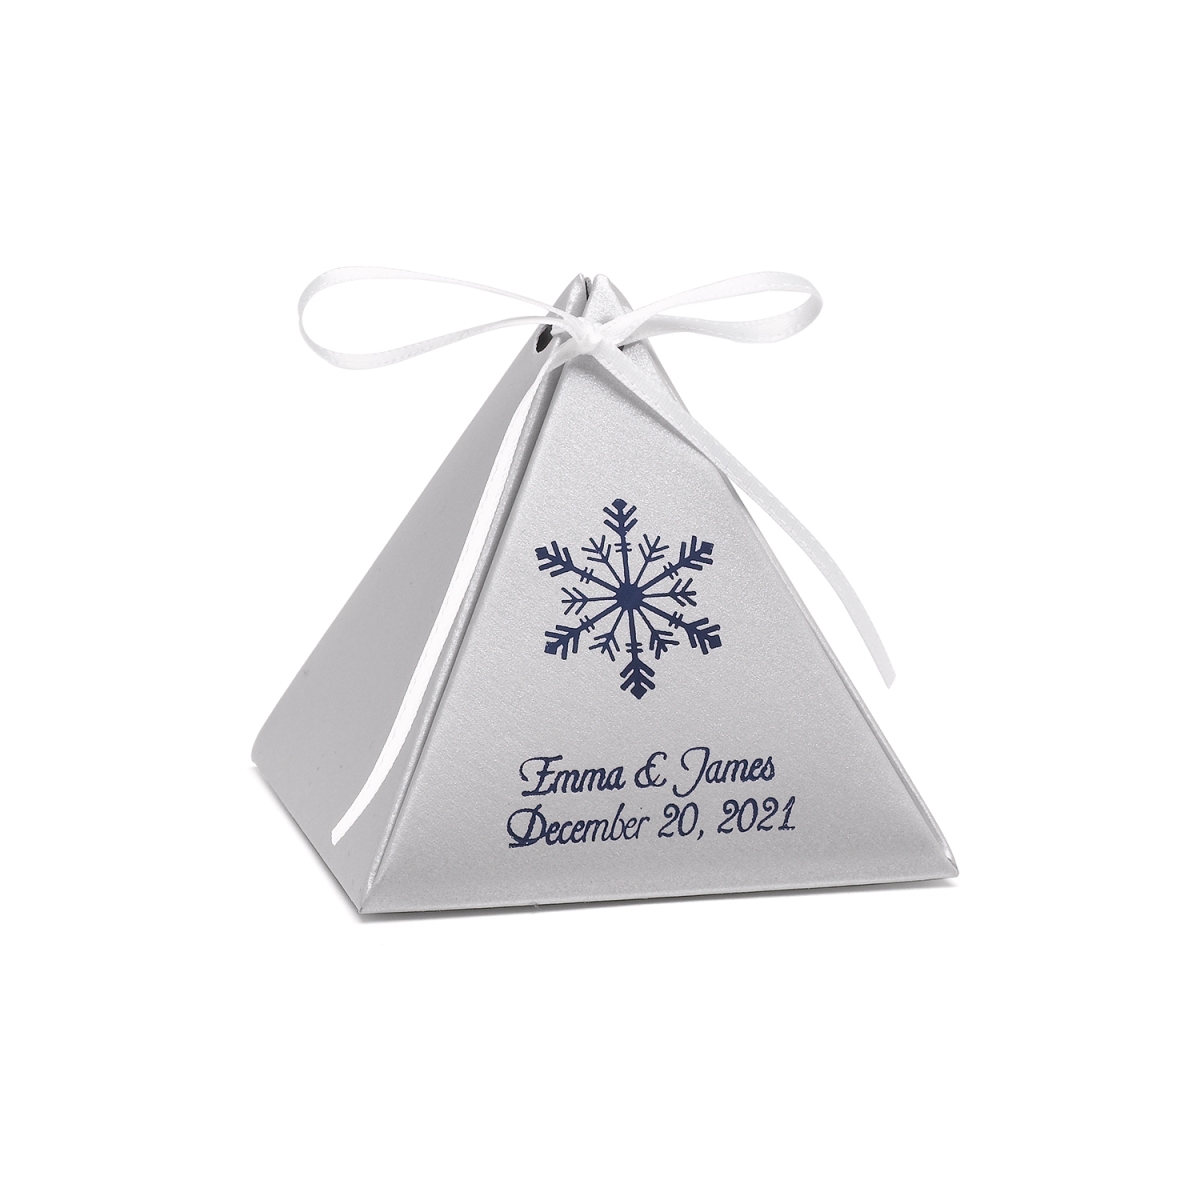 Picture of Hortense B. Hewitt 54878P Pyramid Favor Box - Silver Shimmer - Personalized